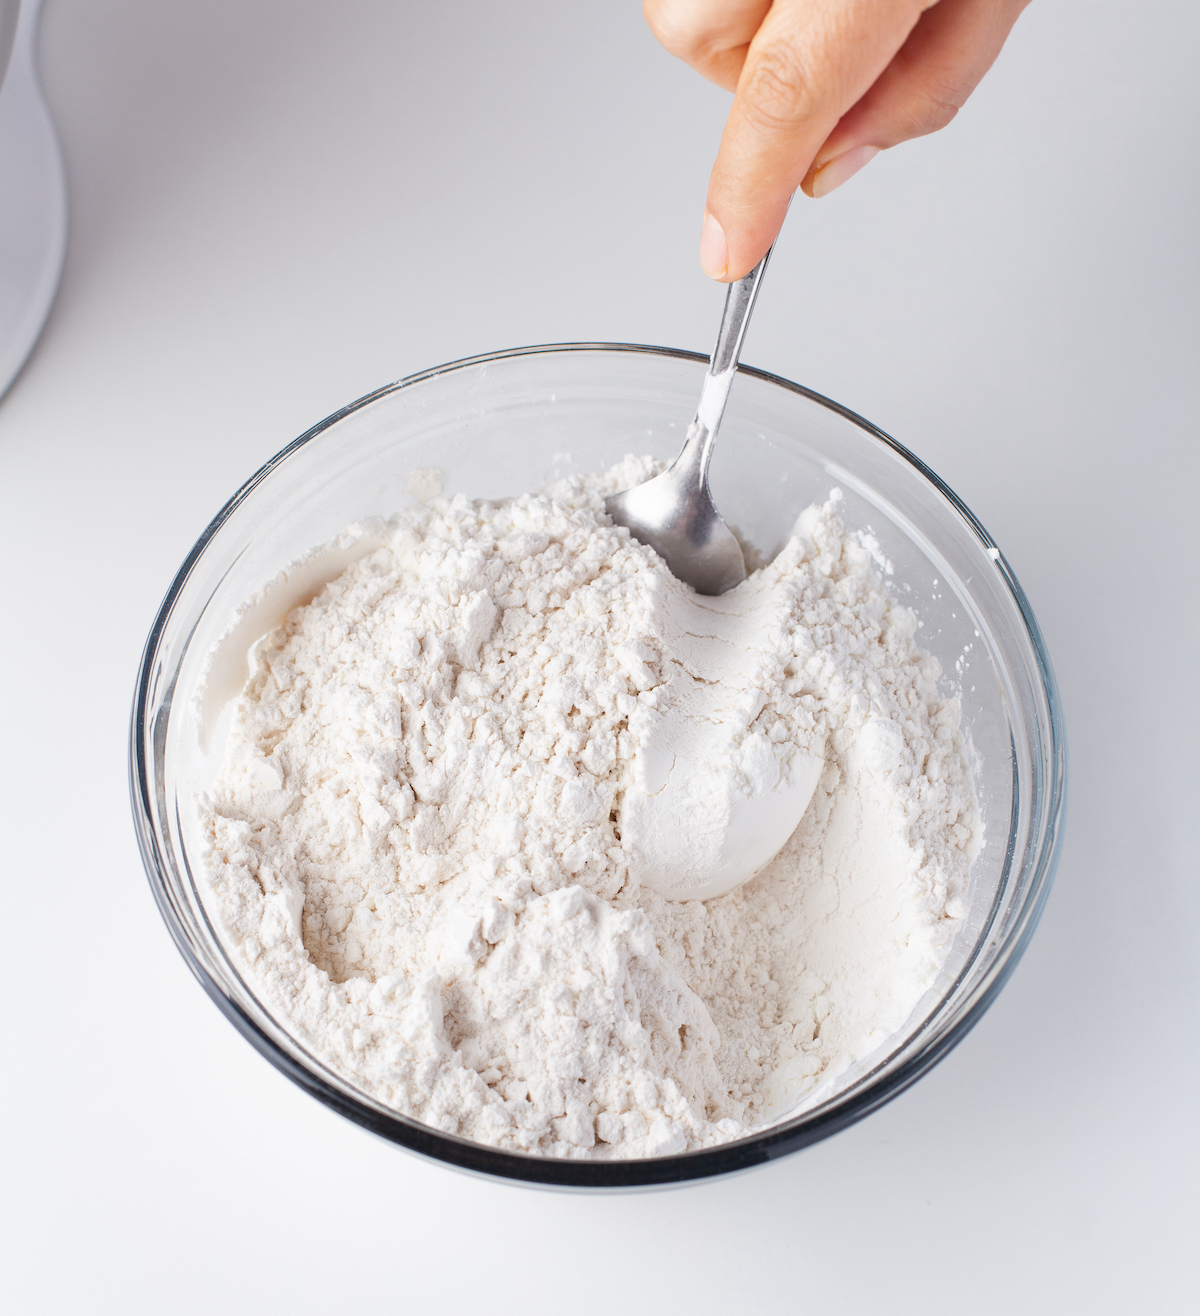 Whisking the flour, salt, and cornstarch together